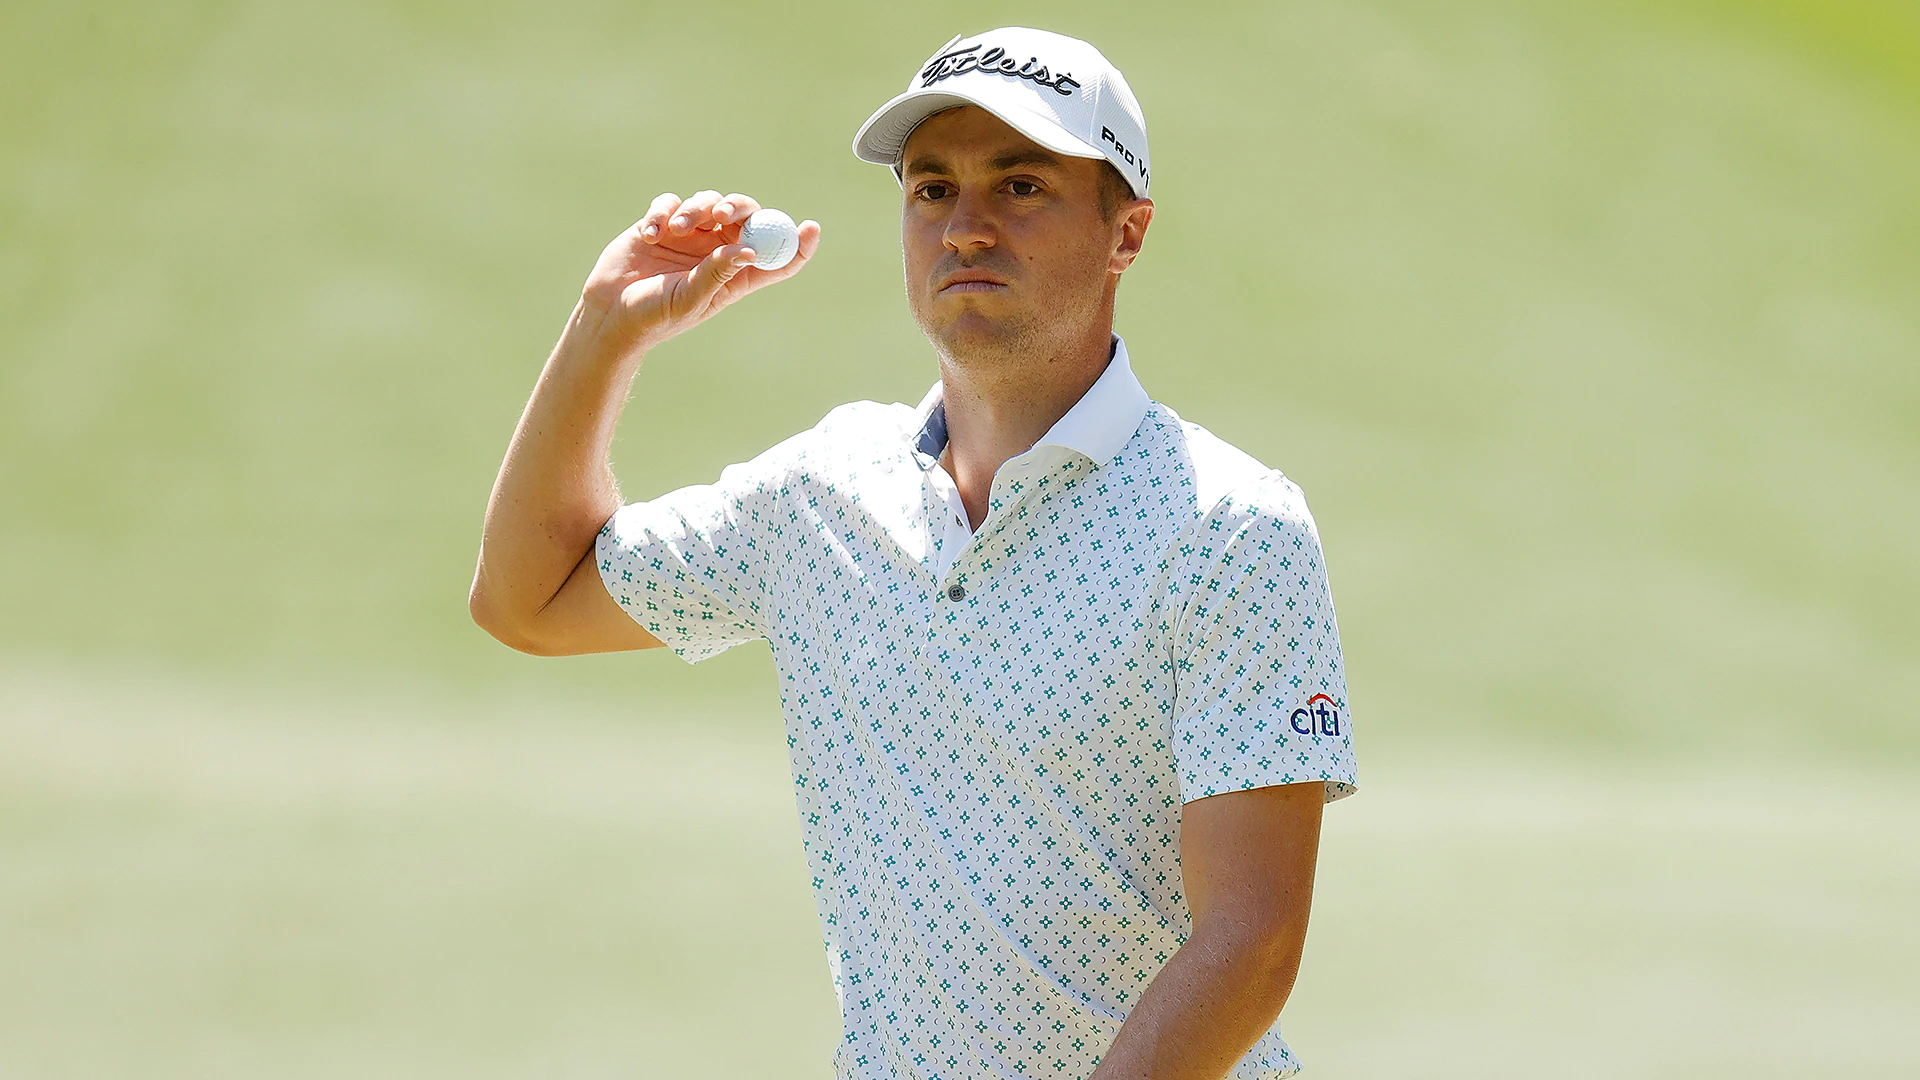 2021 Masters: Justin Thomas has chance to reclaim world No. 1 with Masters win